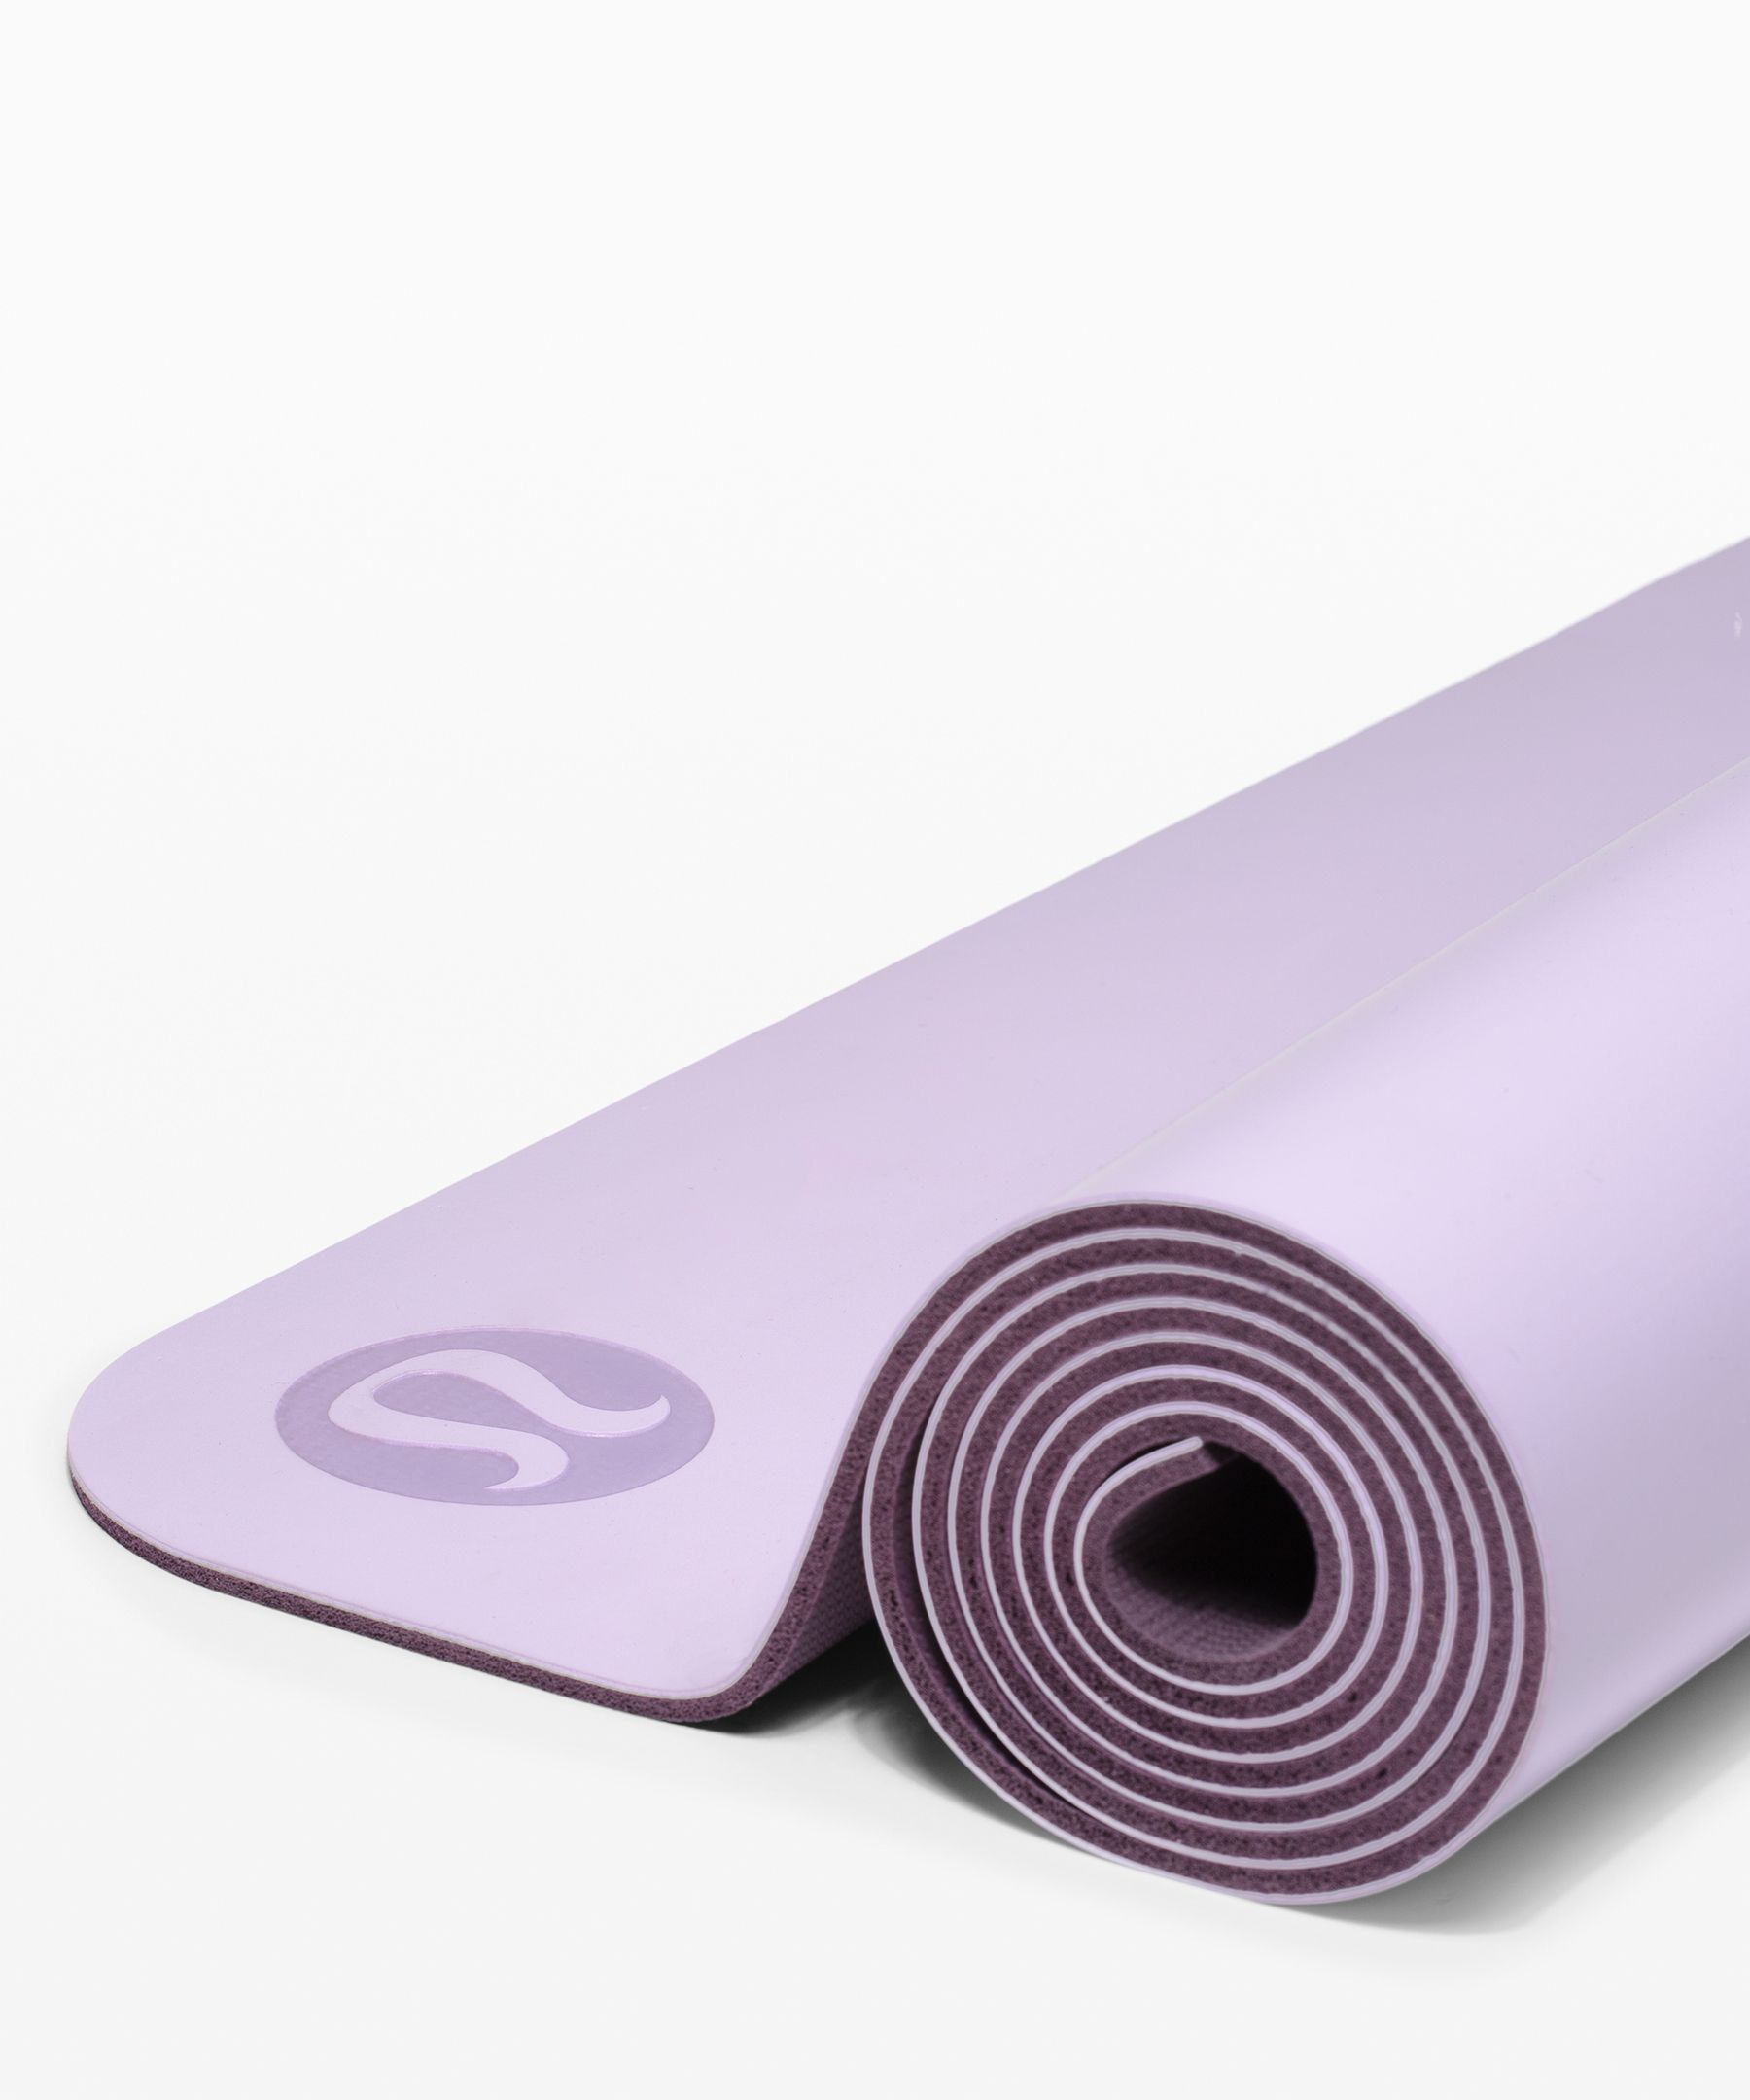 How To Clean Lululemon Yoga Mat At Home : 9 Best Non Slip Yoga Mats In